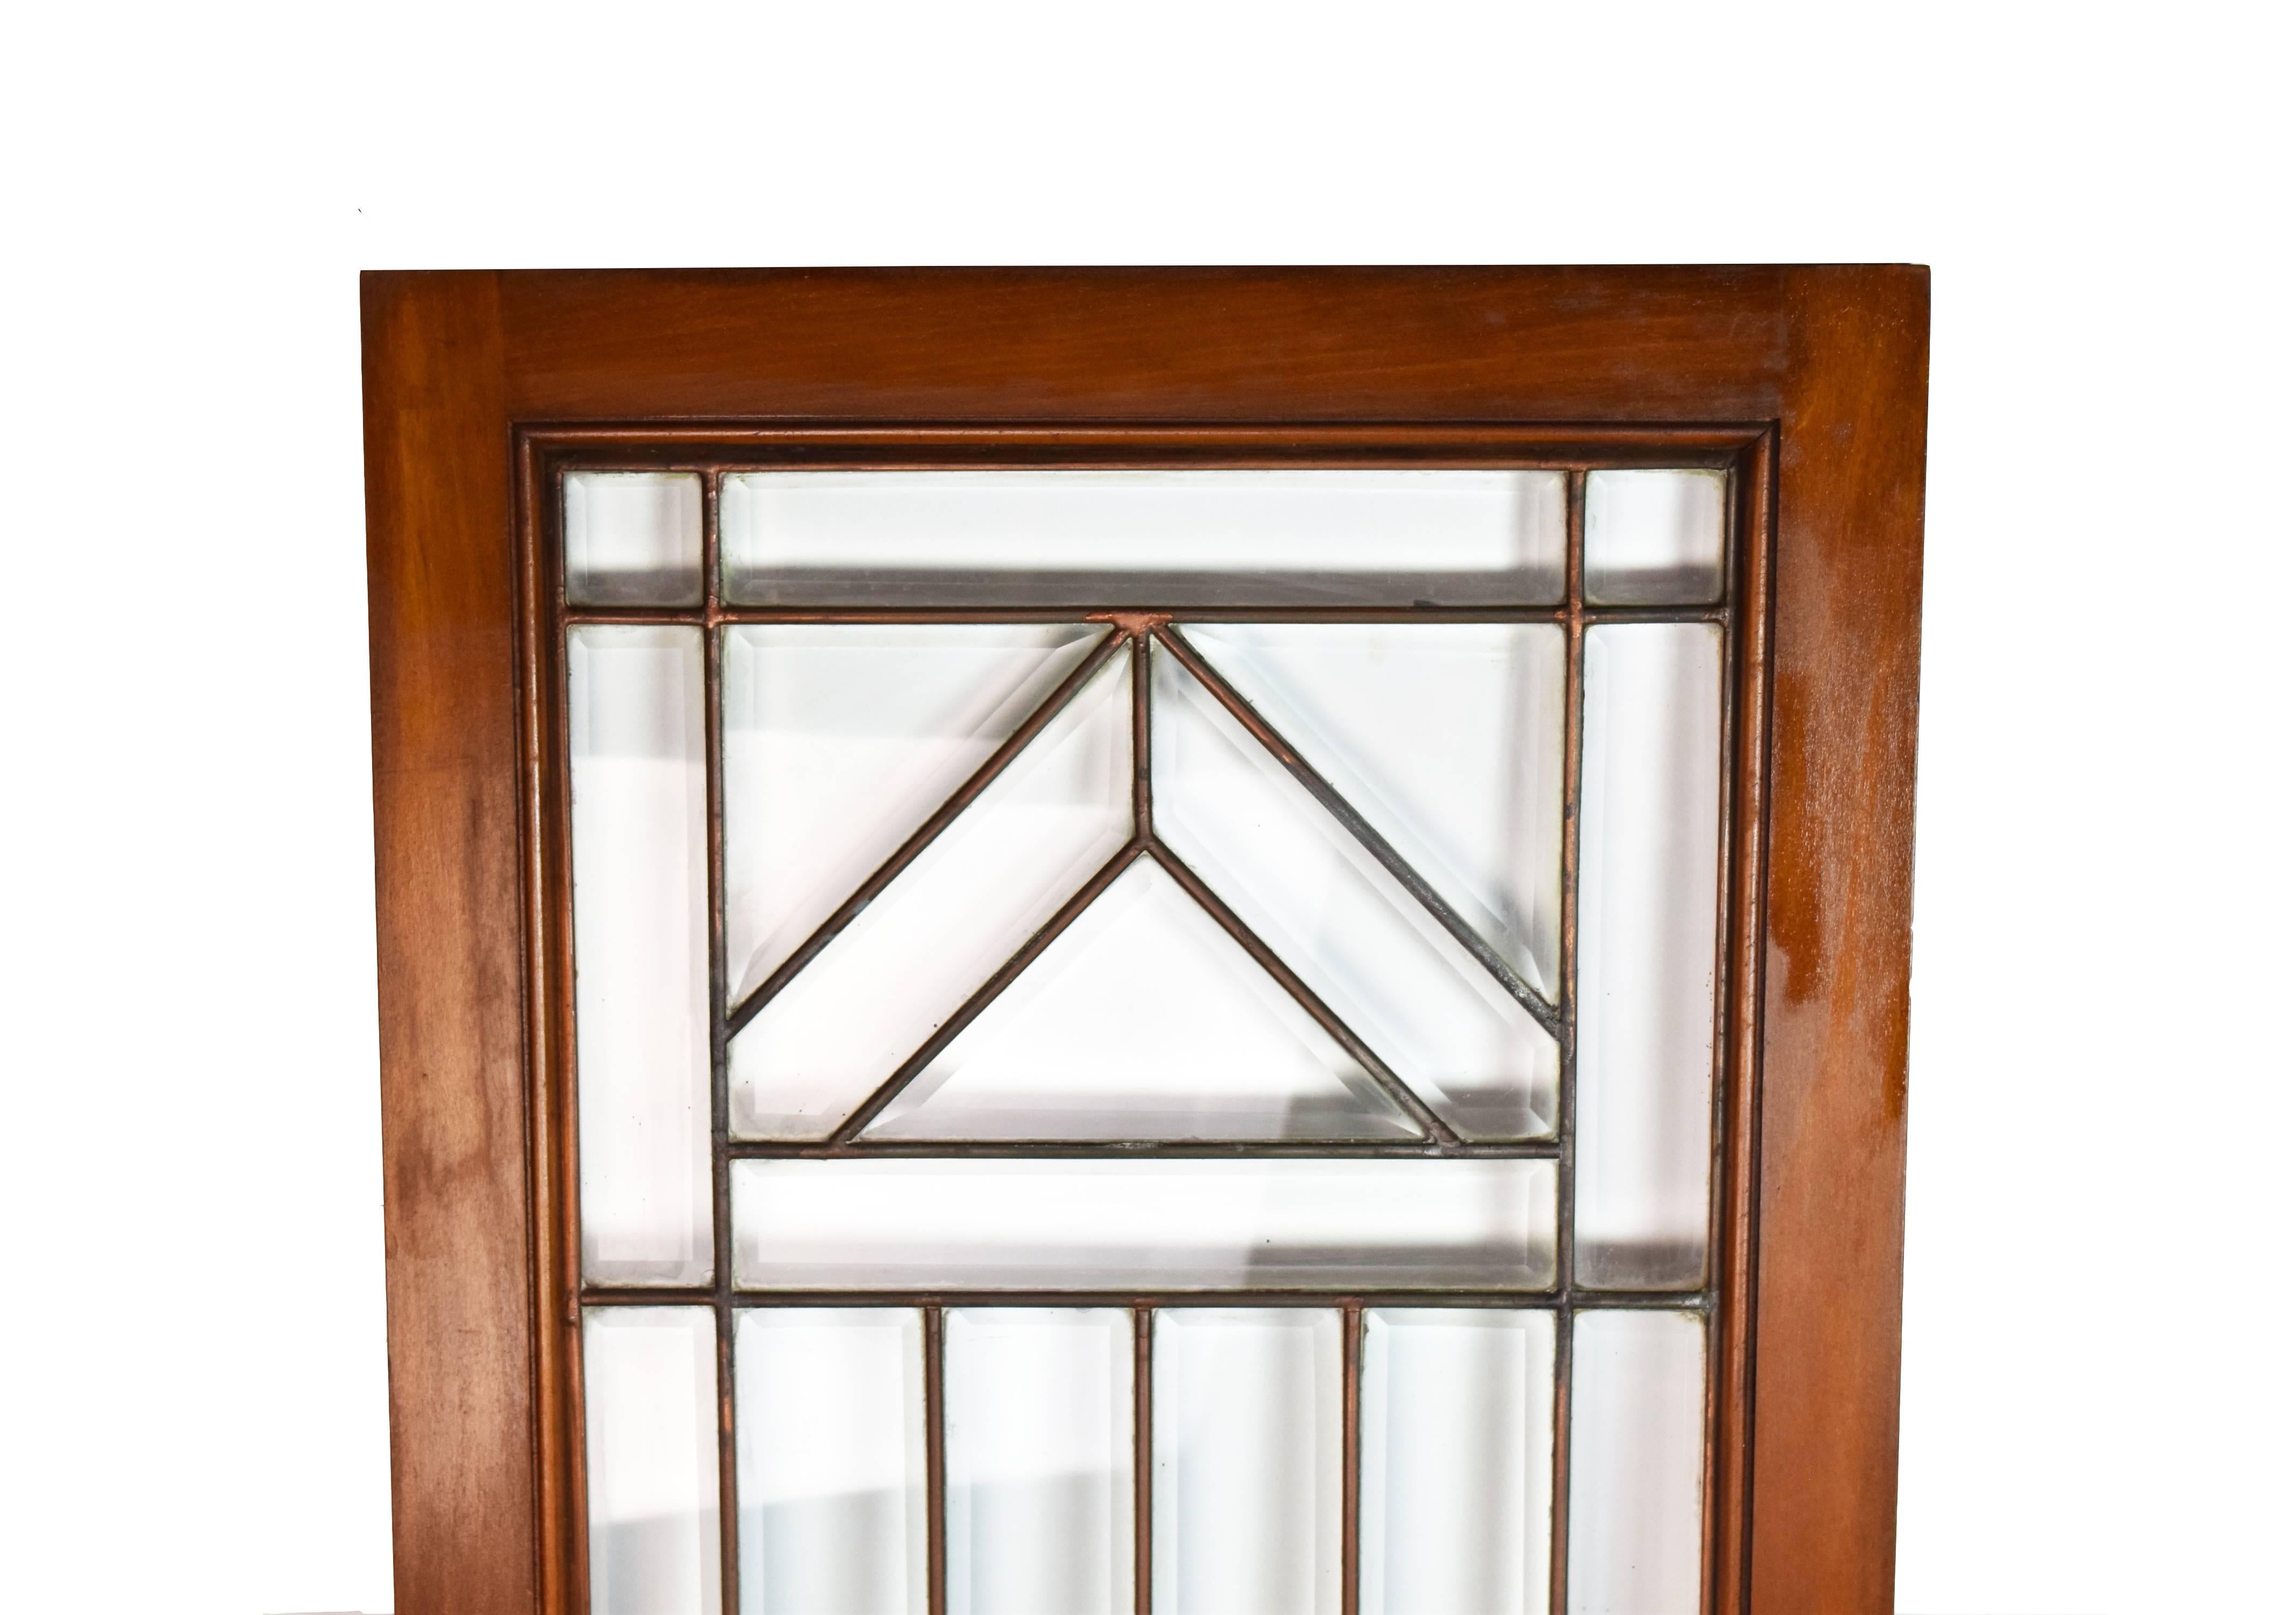 These beautifully simple and elegant Arts & Crafts style beveled cabinet doors have a beautiful wood frame with geometric glasswork. There are two matching doors available in this size.